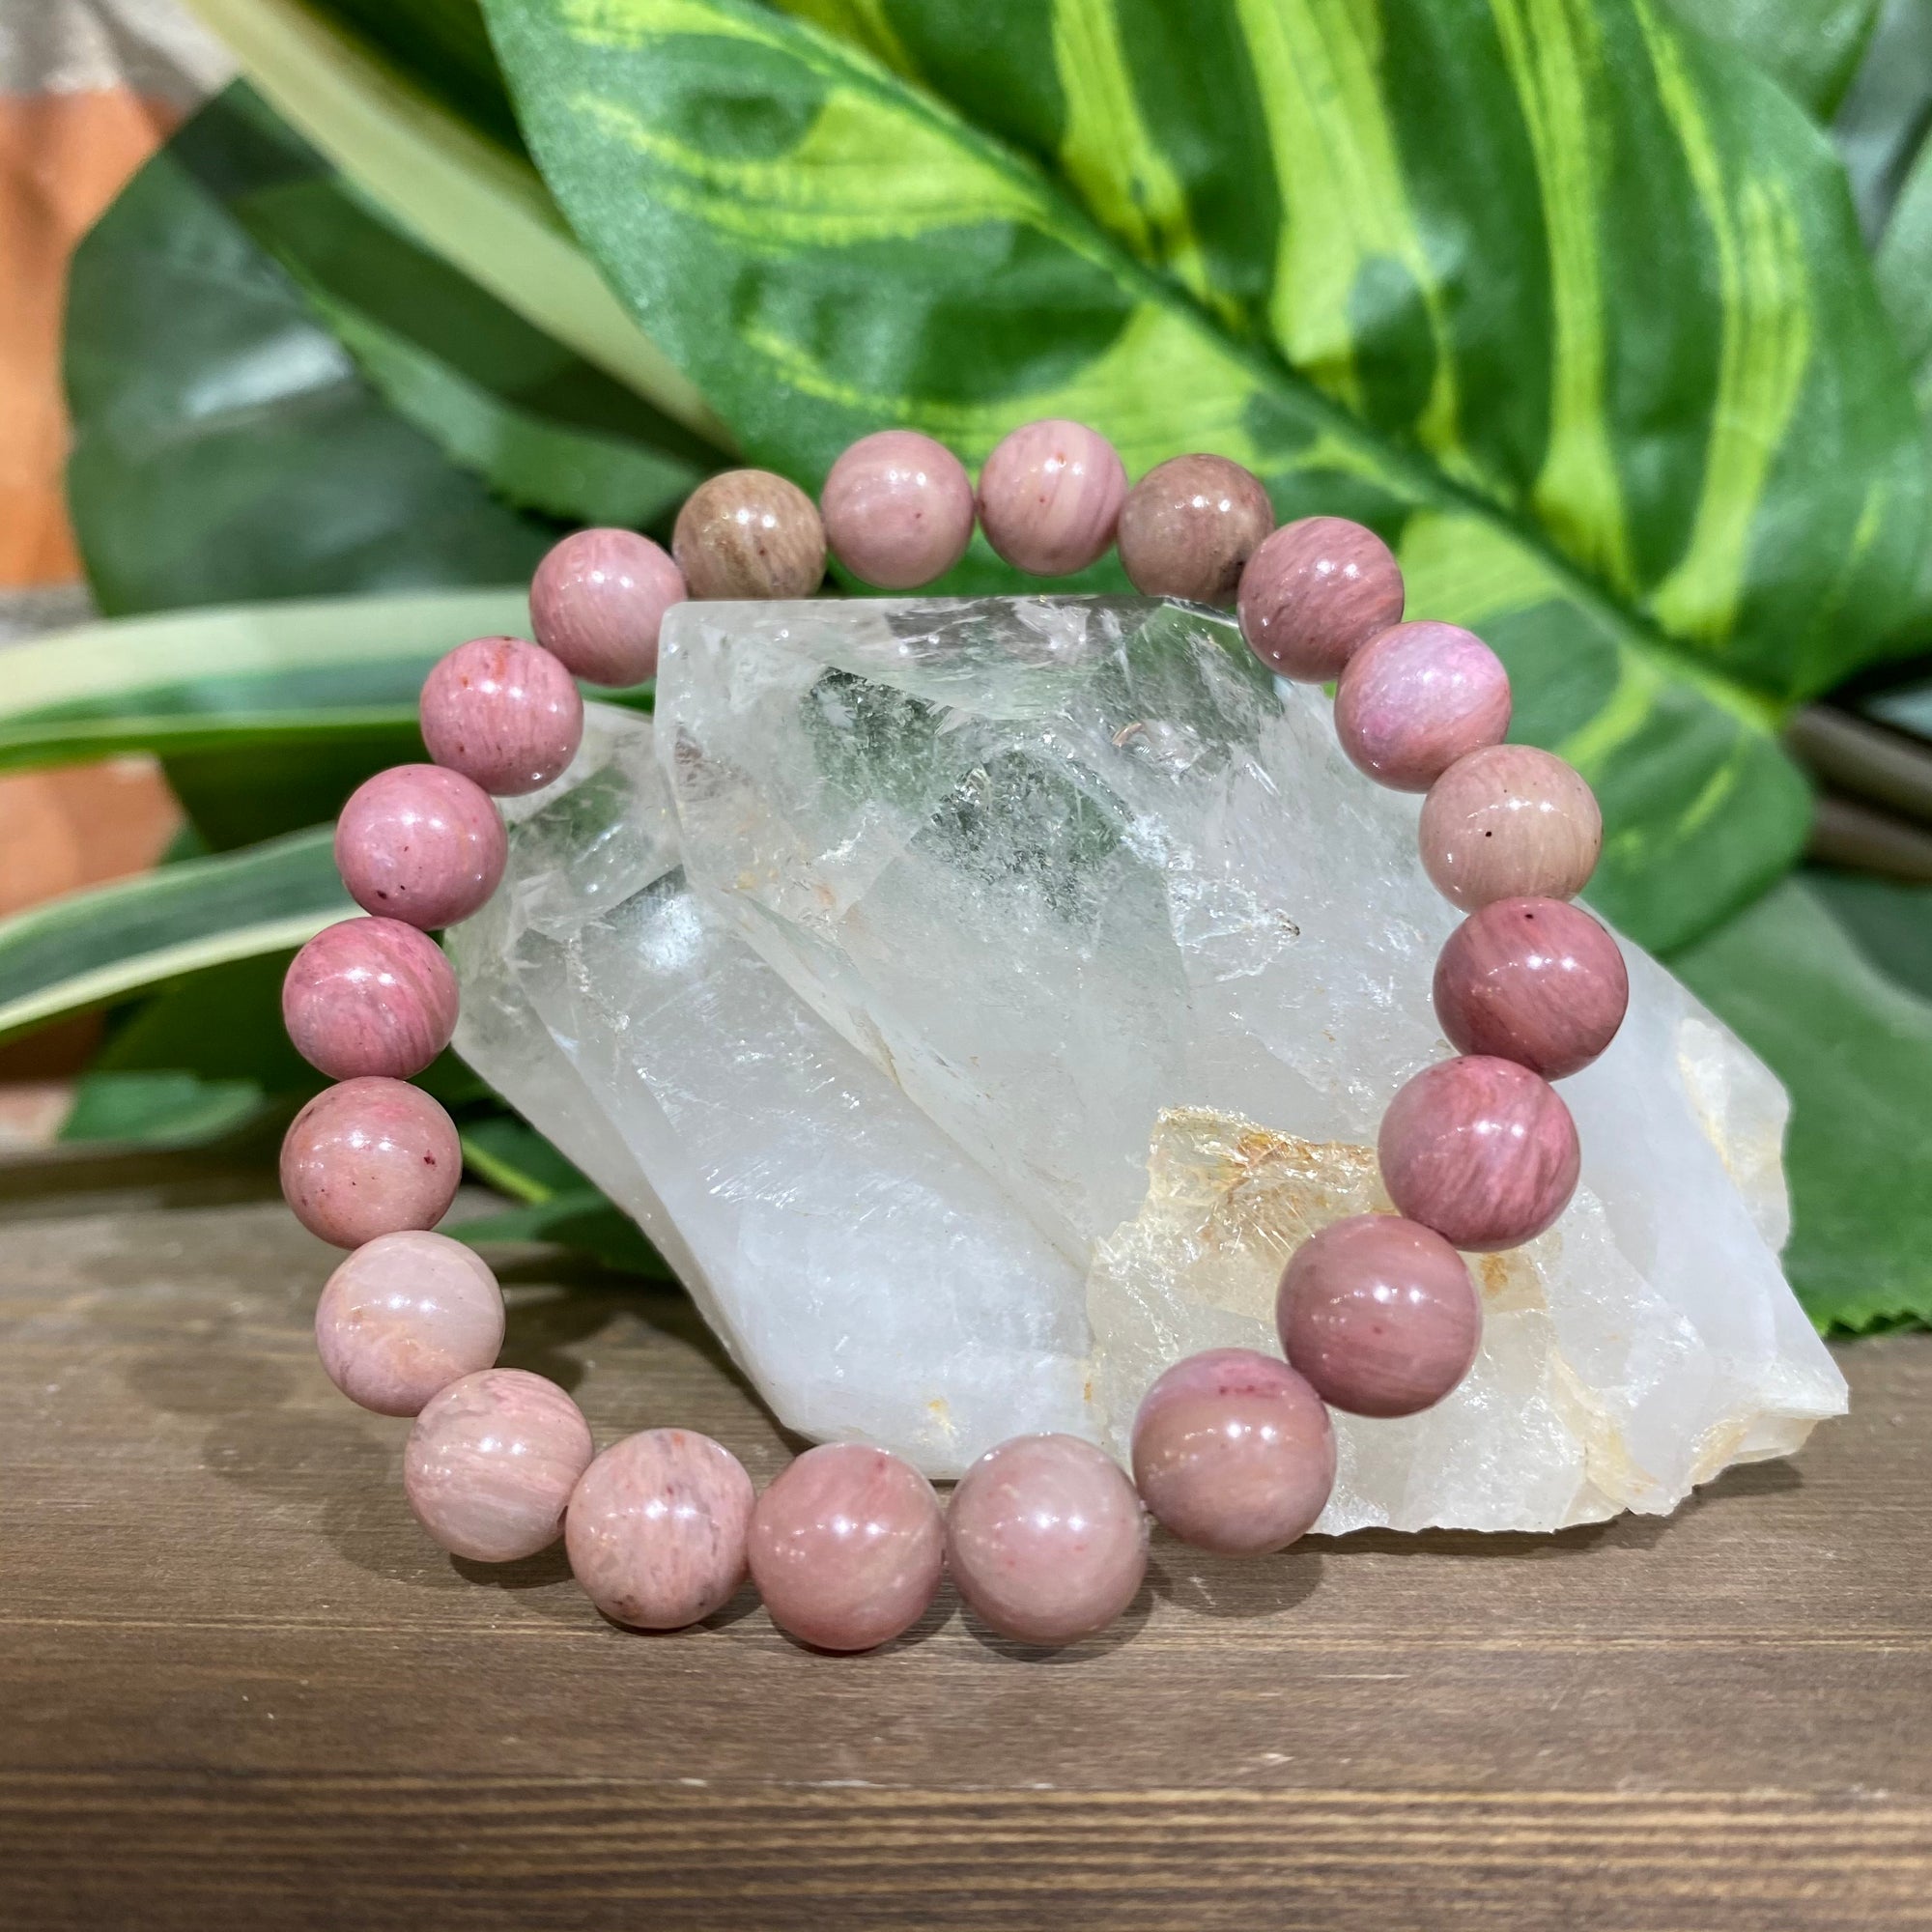 Amazon.com: Healing Bracelets for Women - Rose Quartz & Rhodonite Bracelet  - Healing Prayers Crystal Bracelet, 8mm Natural Stone Anti Anxiety Stress  Relief Yoga Beads Get Well Soon Gifts : Handmade Products